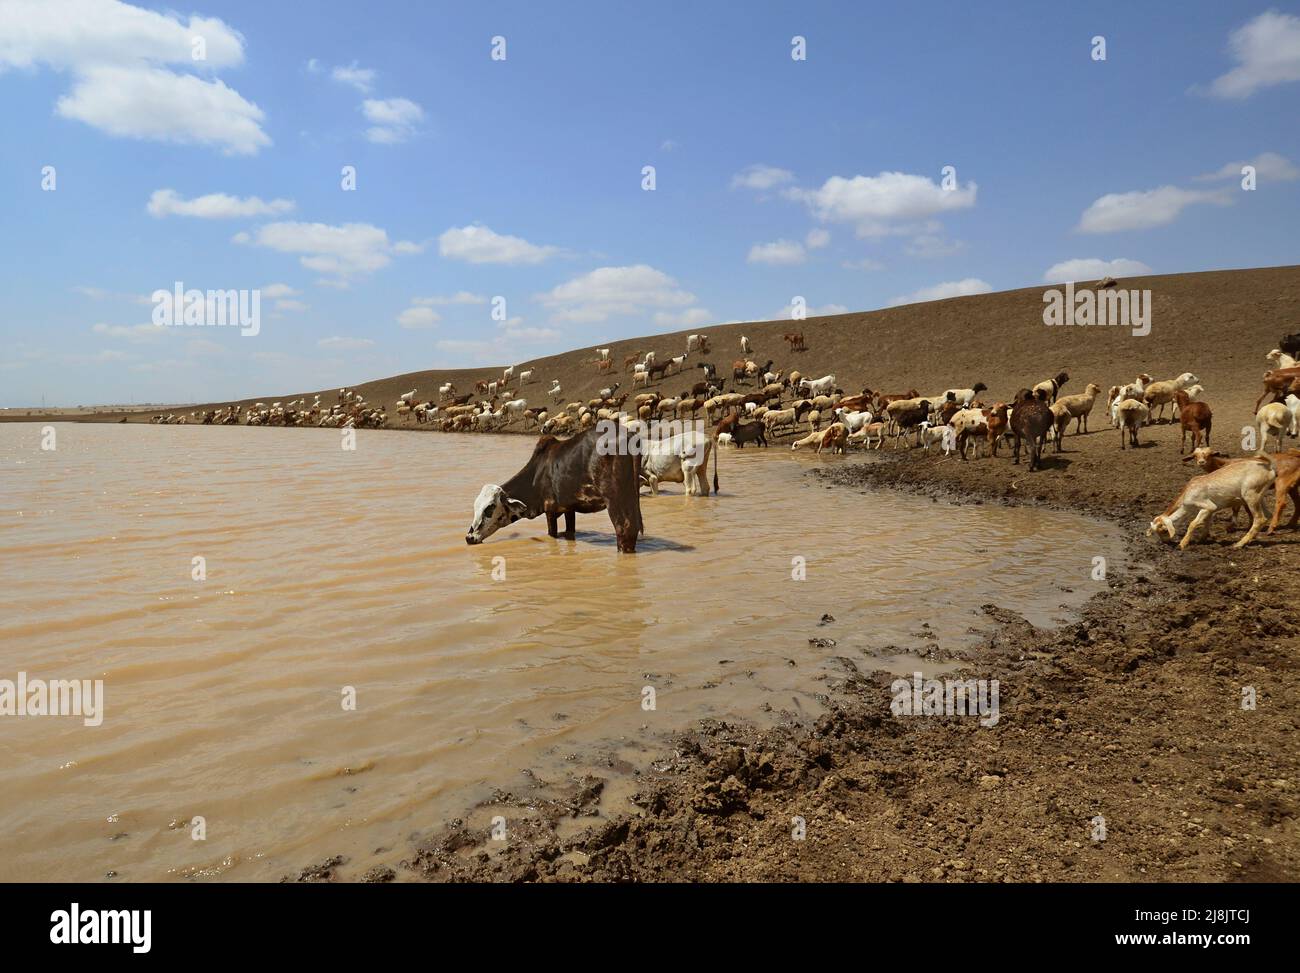 Masai cattle drinking on a water hole during dry season in Tanzania, Africa Stock Photo